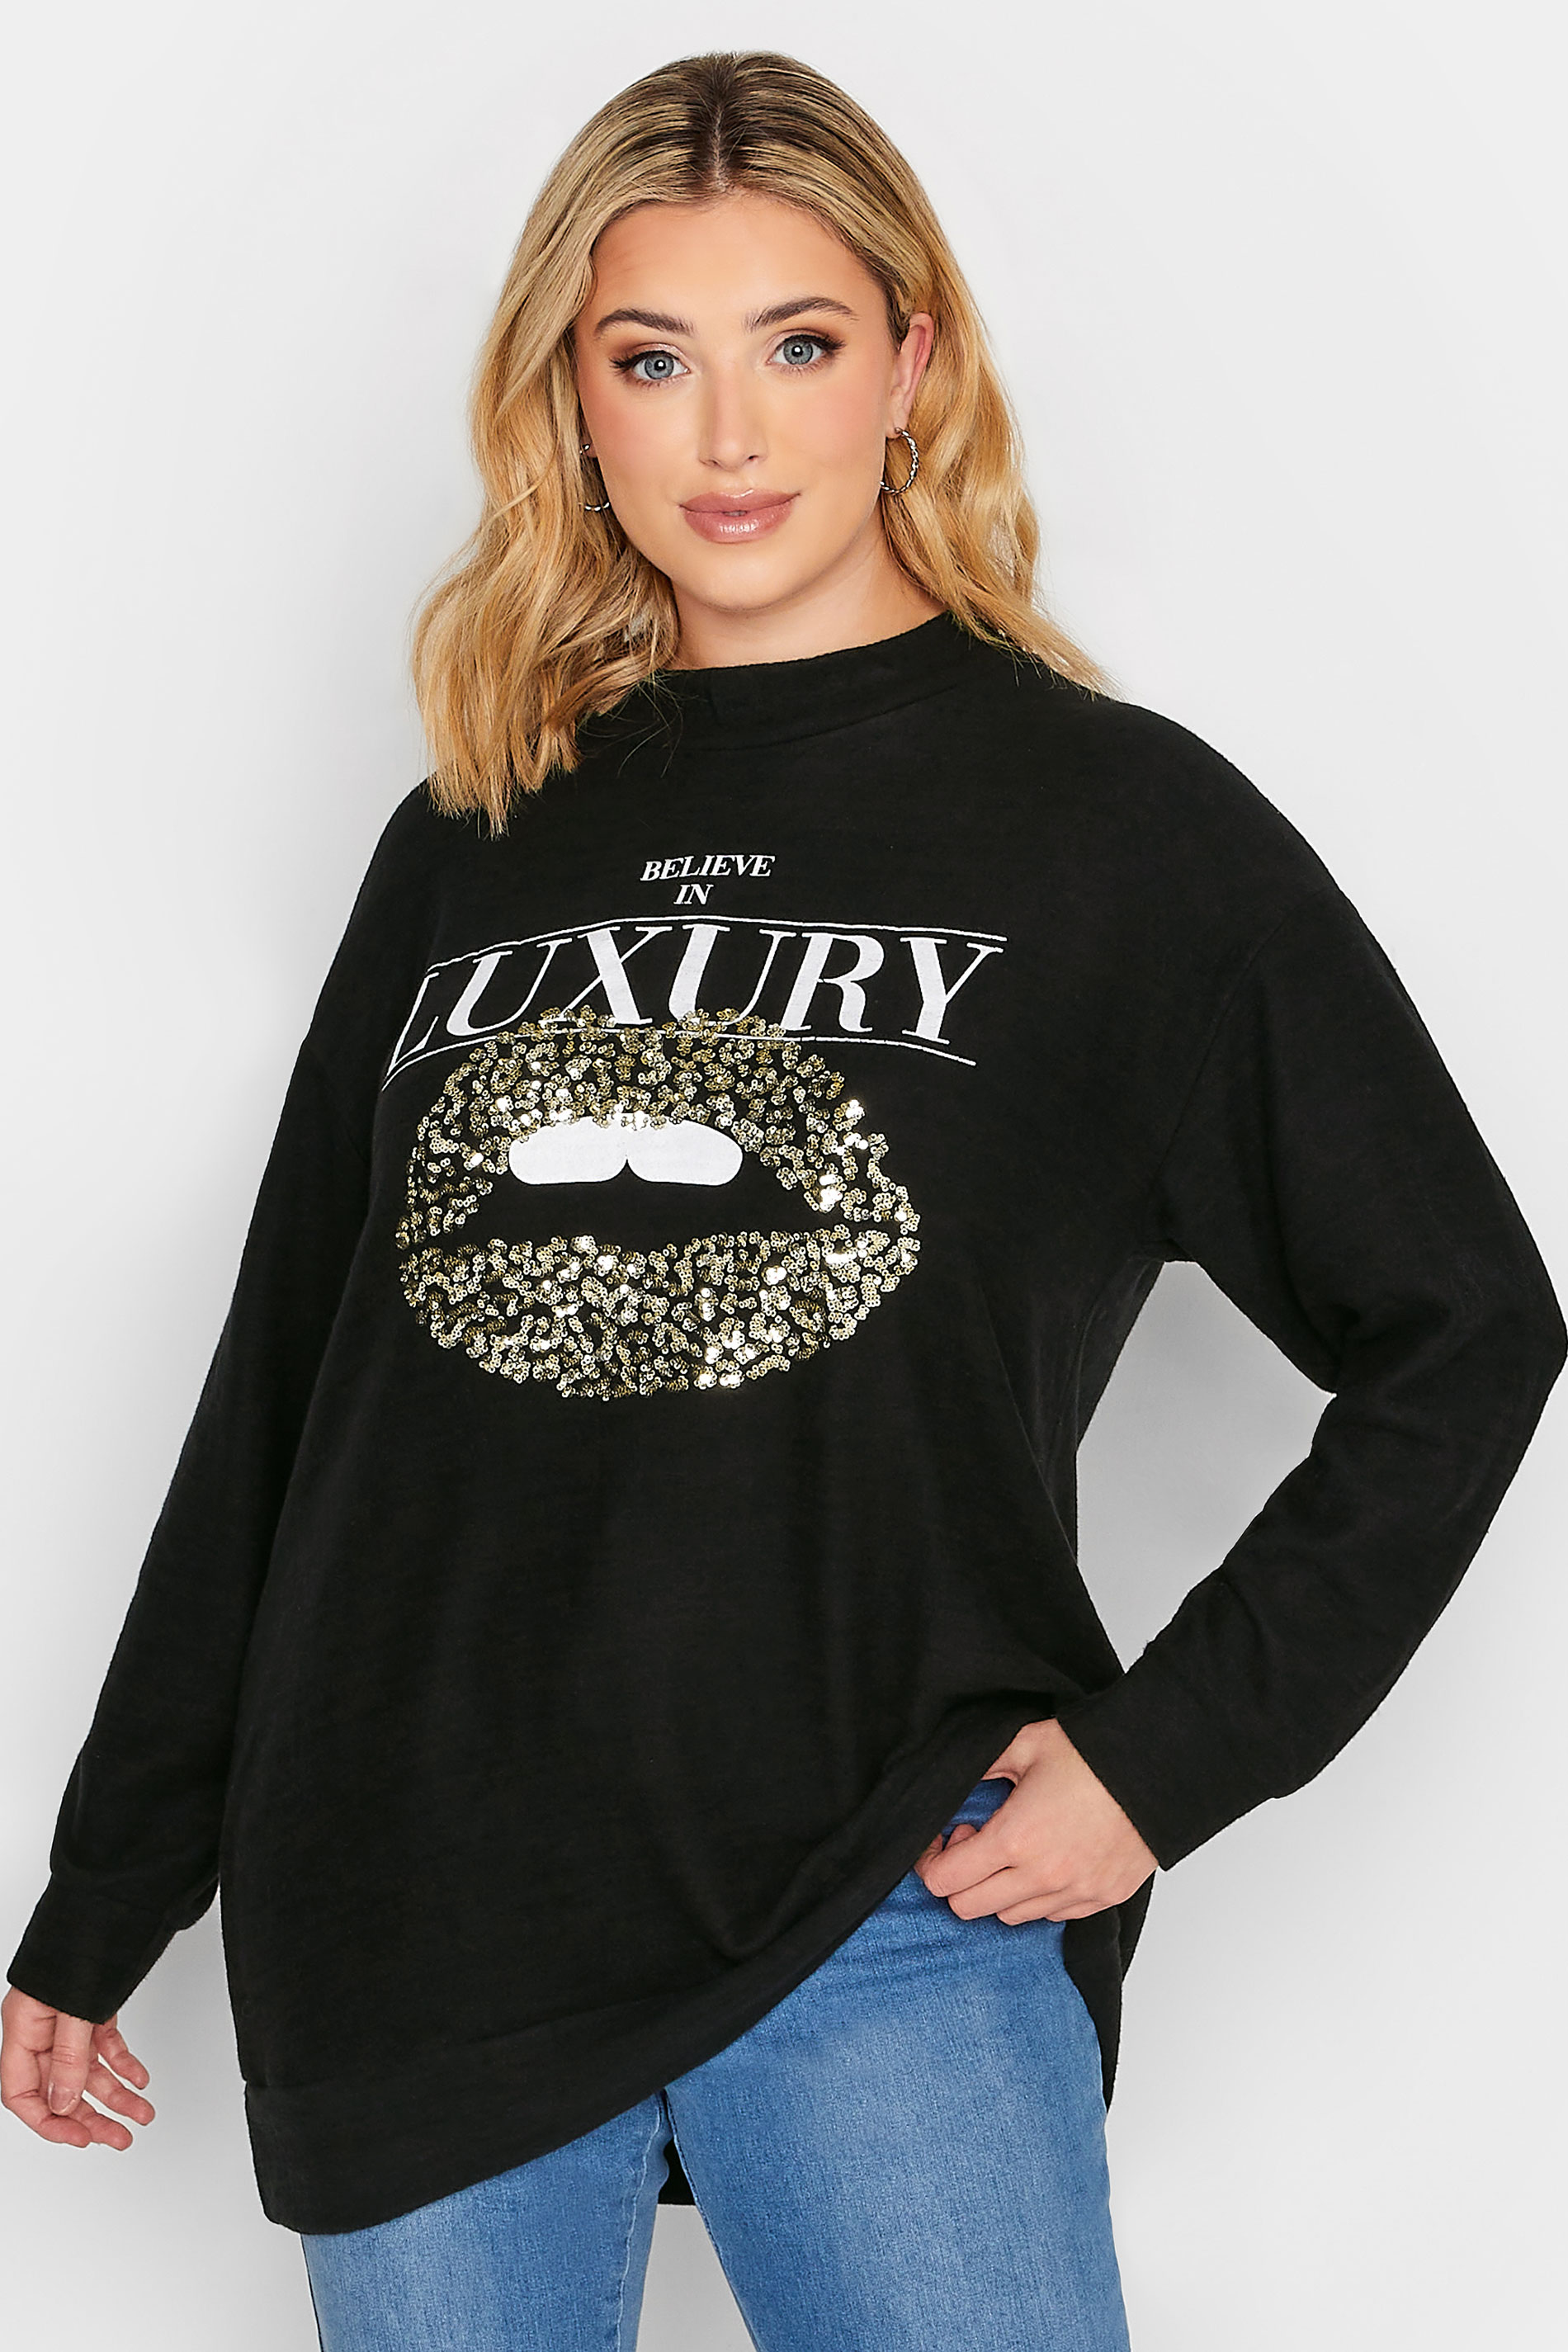 YOURS Curve Plus Size Black Glitter Lips Print 'Believe In Luxury' Slogan Soft Touch Top 1